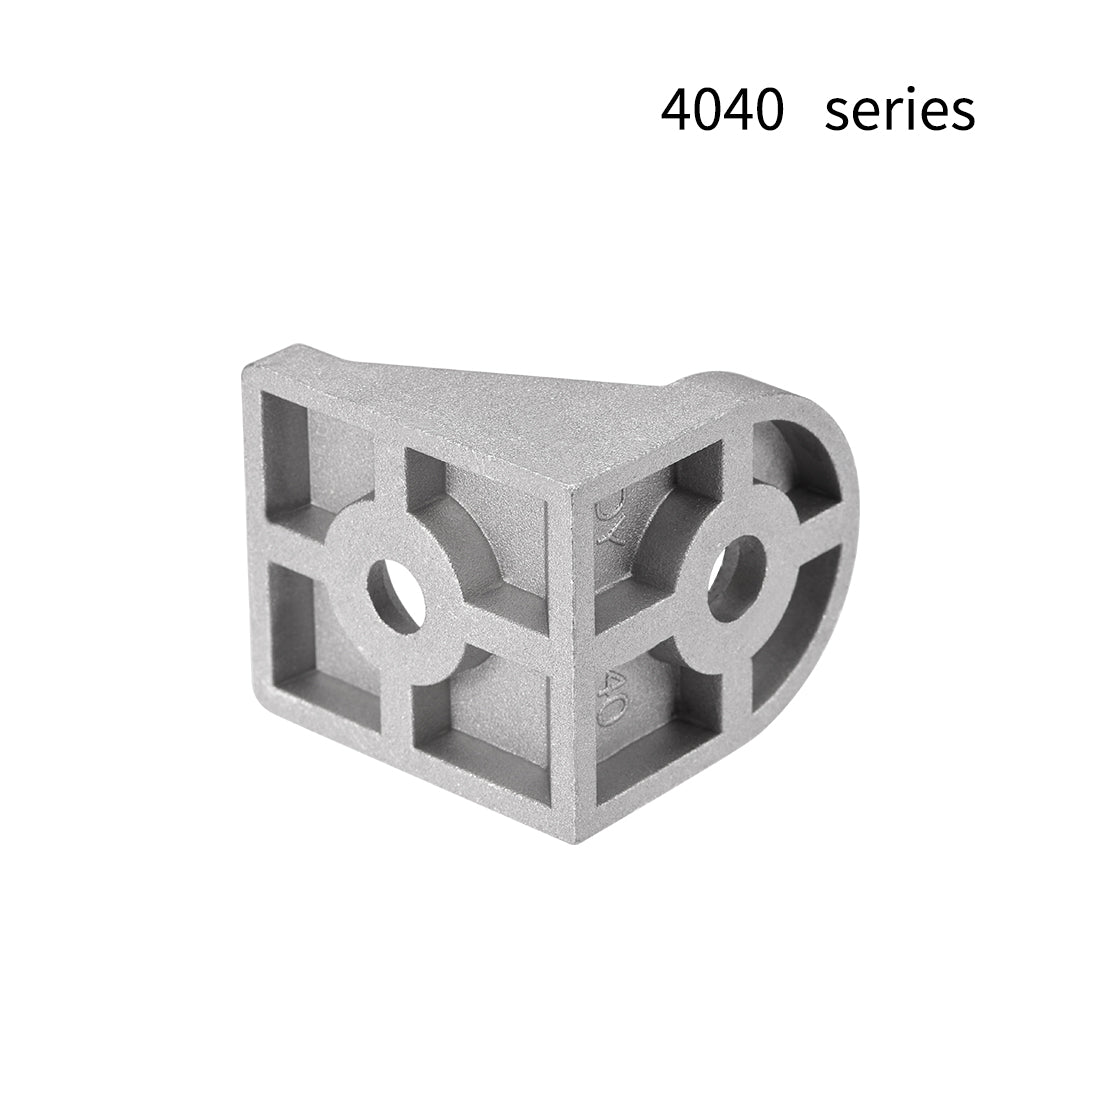 uxcell Uxcell Angle Arbitrary Bracket Set, Corner L Connector for 4040 Series Aluminum Extrusion Profile with Slot 8mm, 2 Pcs